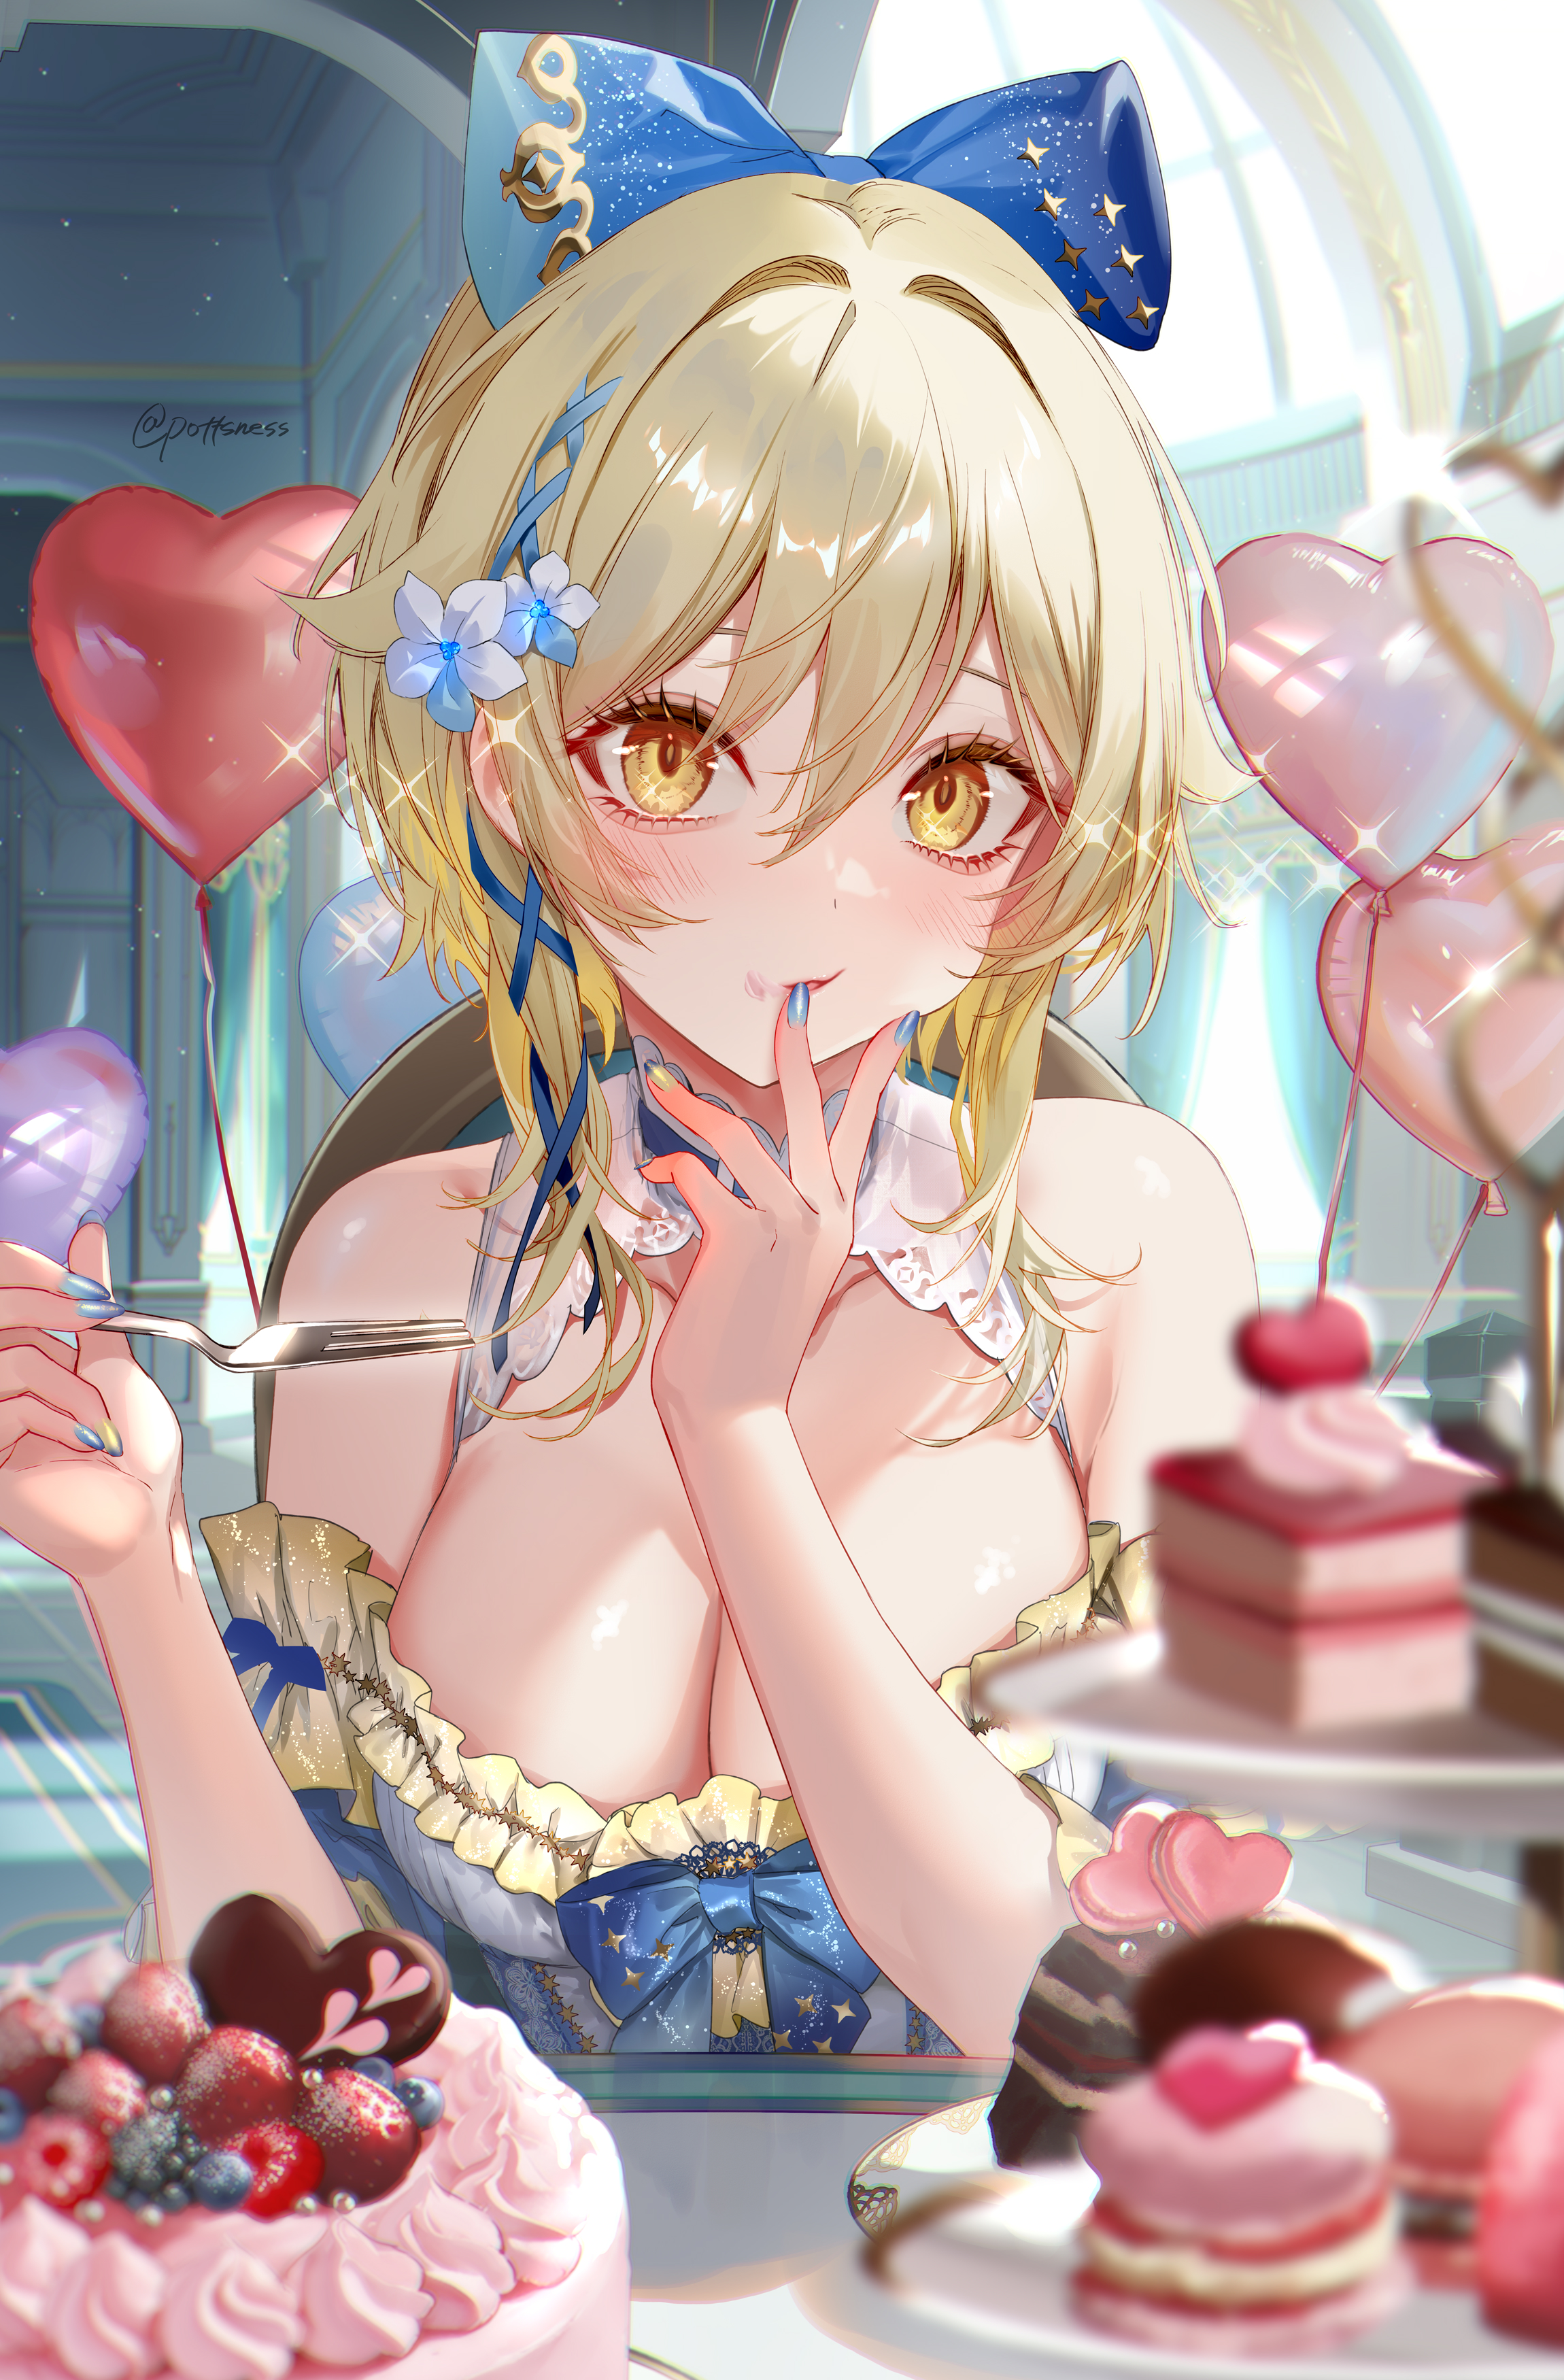 Anime 2300x3500 Genshin Impact artwork Lumine (Genshin Impact) blonde yellow eyes flower in hair cleavage big boobs colored nails finger in mouth balloon cake Pottsness portrait display anime girls anime